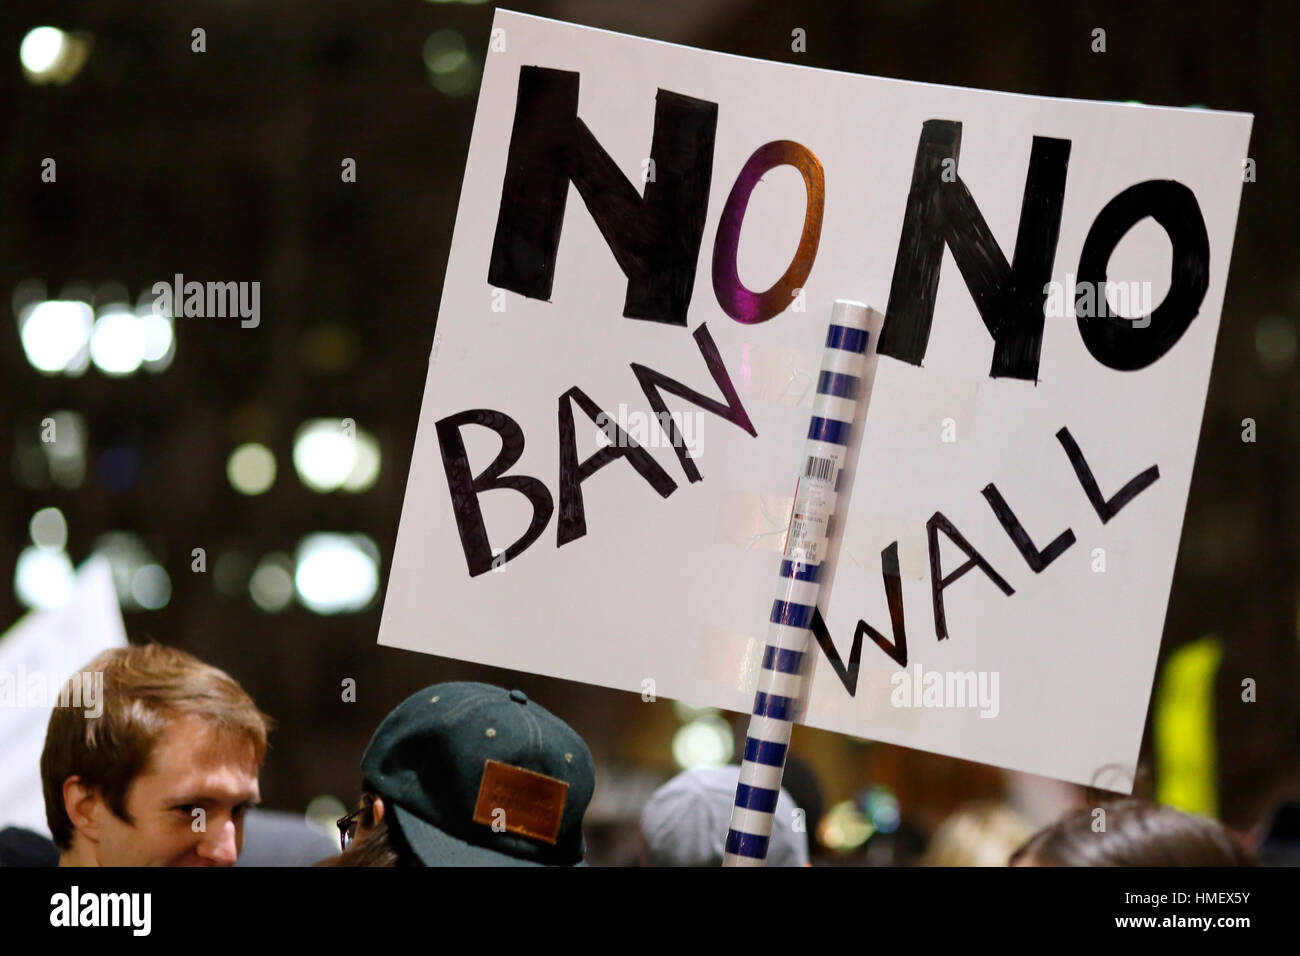 New York, United States. 01st Feb, 2017. Protesters holds a sign, 'No Ban on Stolen Land' at a No Ban No Wall rally for Muslims and Allies in Foley Square outside the Jacob K. Javits Federal Building. Credit: Robert K. Chin Credit: Robert K. Chin/Pacific Press/Alamy Live News Stock Photo